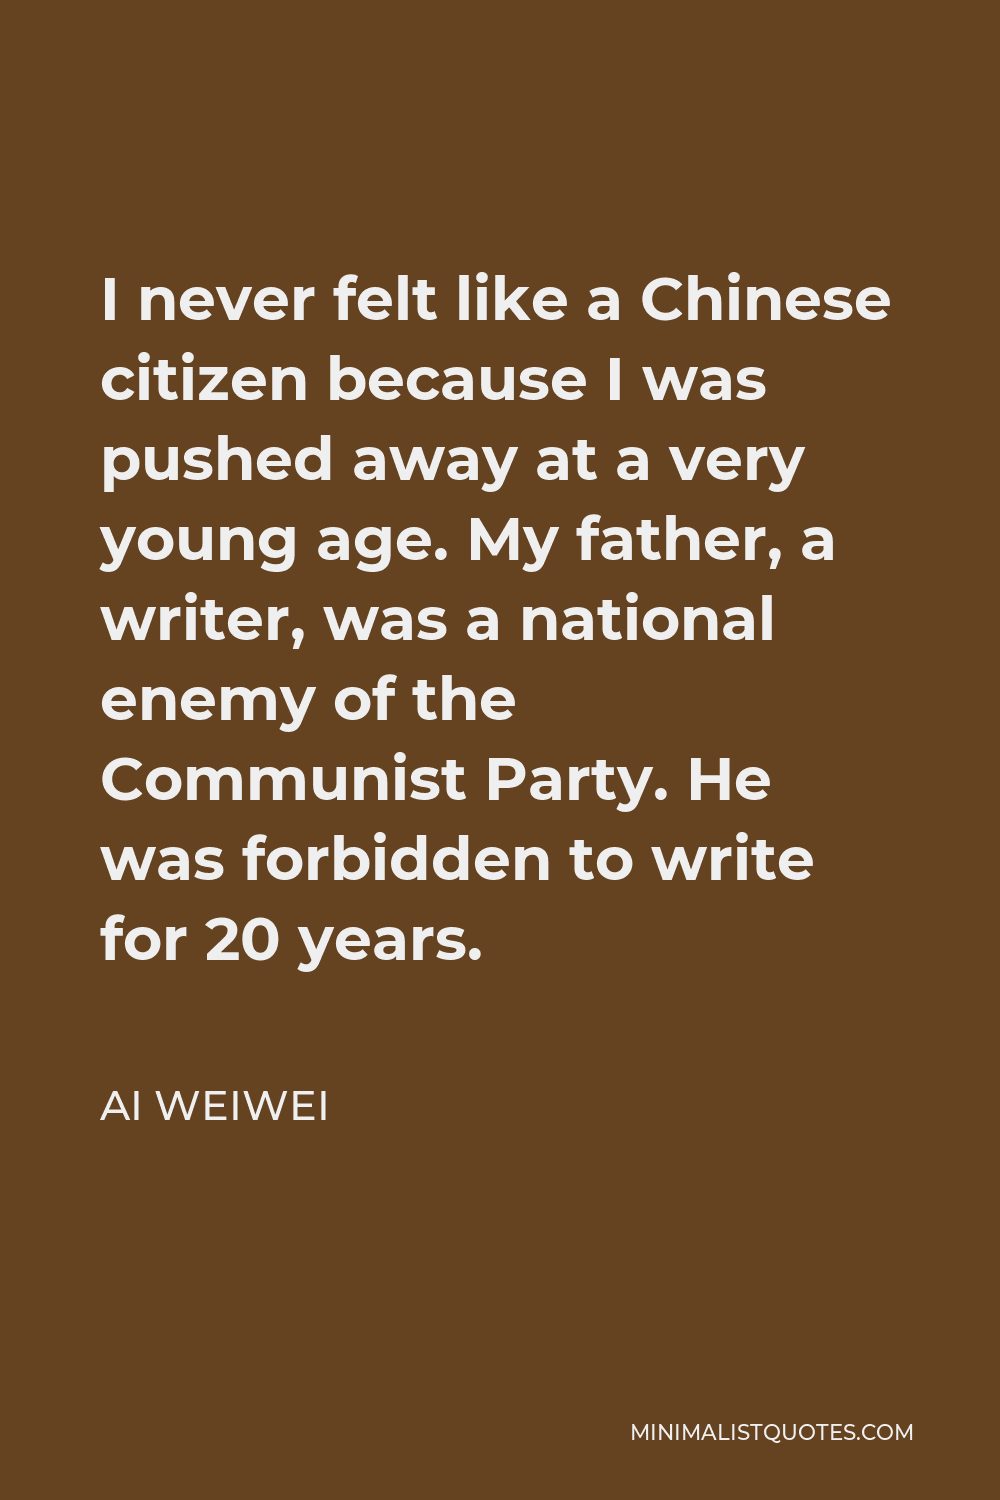 Ai Weiwei Quote - I never felt like a Chinese citizen because I was pushed away at a very young age. My father, a writer, was a national enemy of the Communist Party. He was forbidden to write for 20 years.